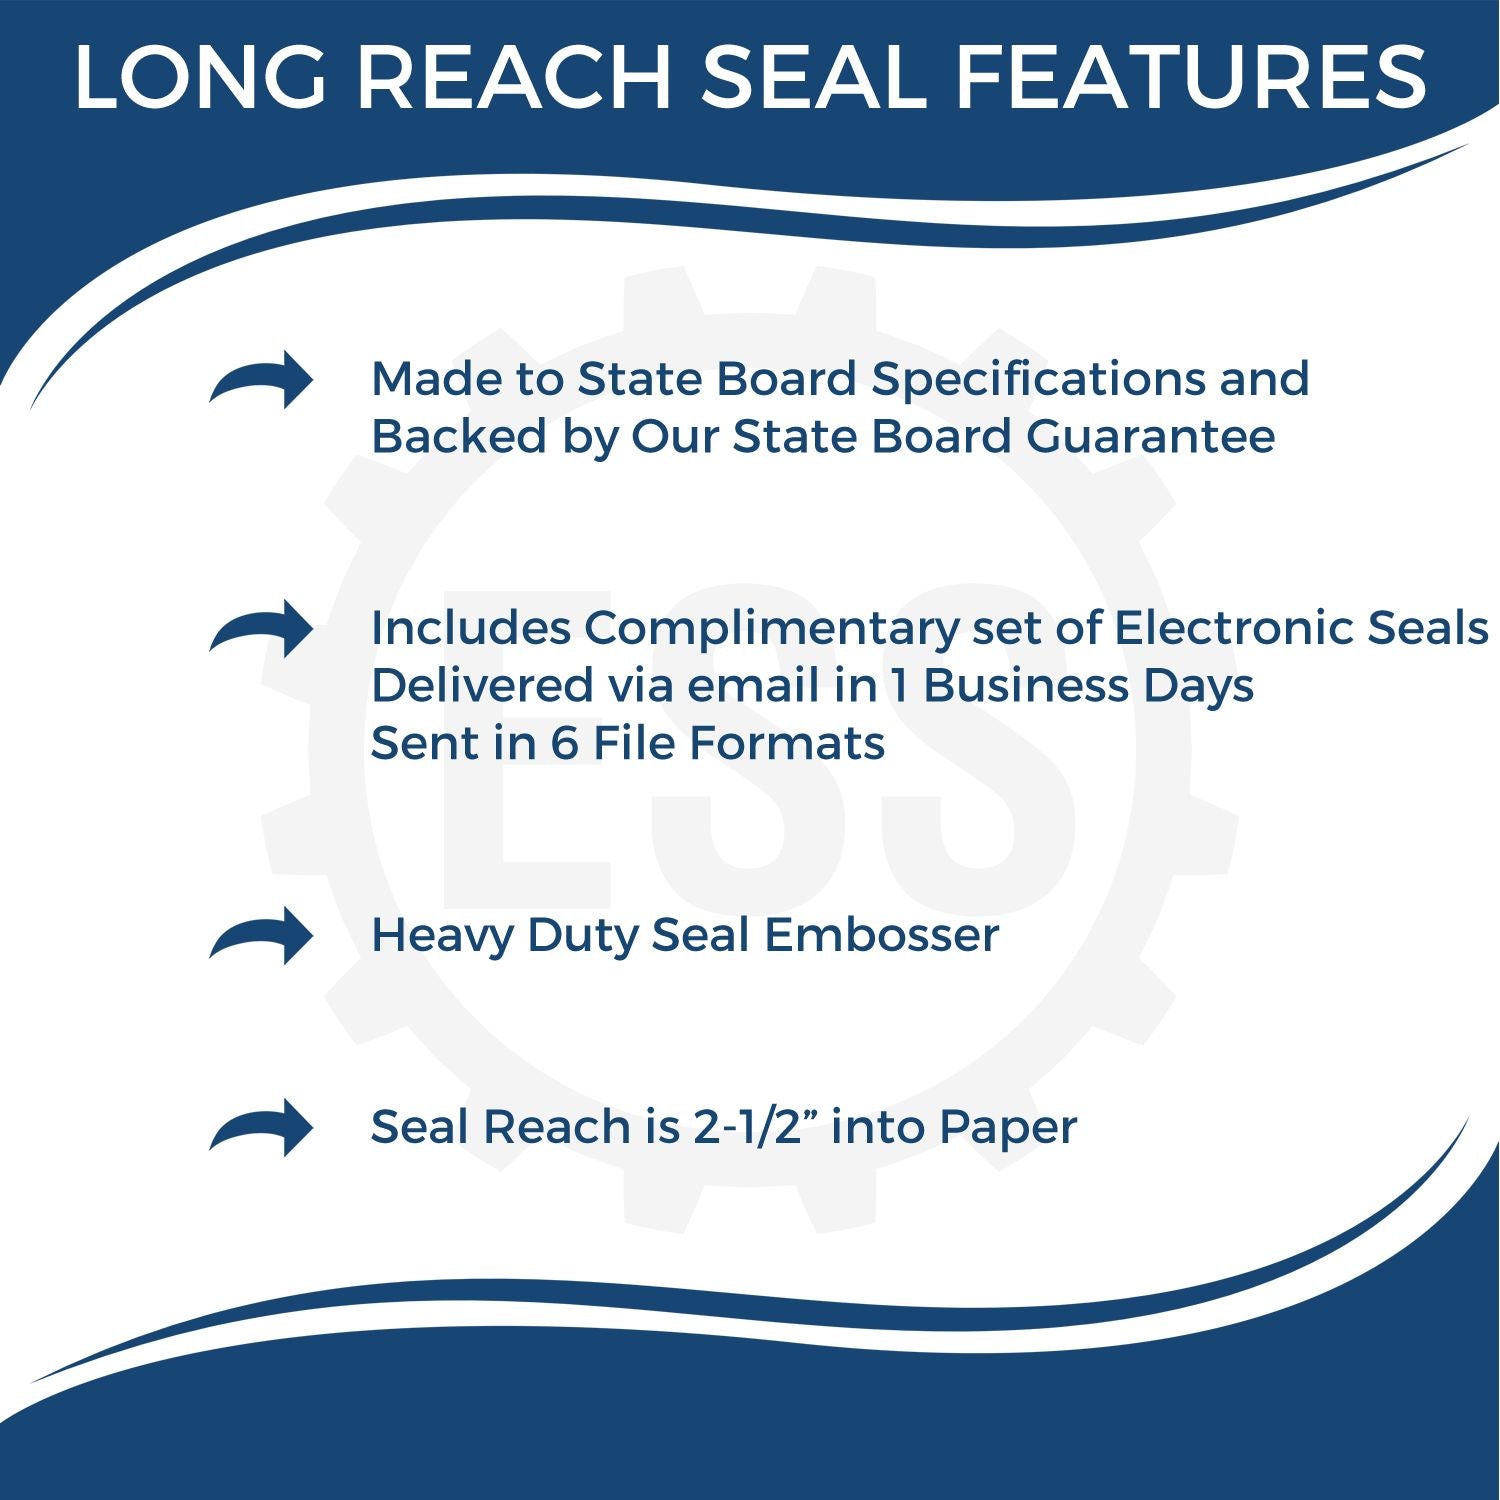 A picture of an infographic highlighting the selling points for the Long Reach New Mexico Land Surveyor Seal